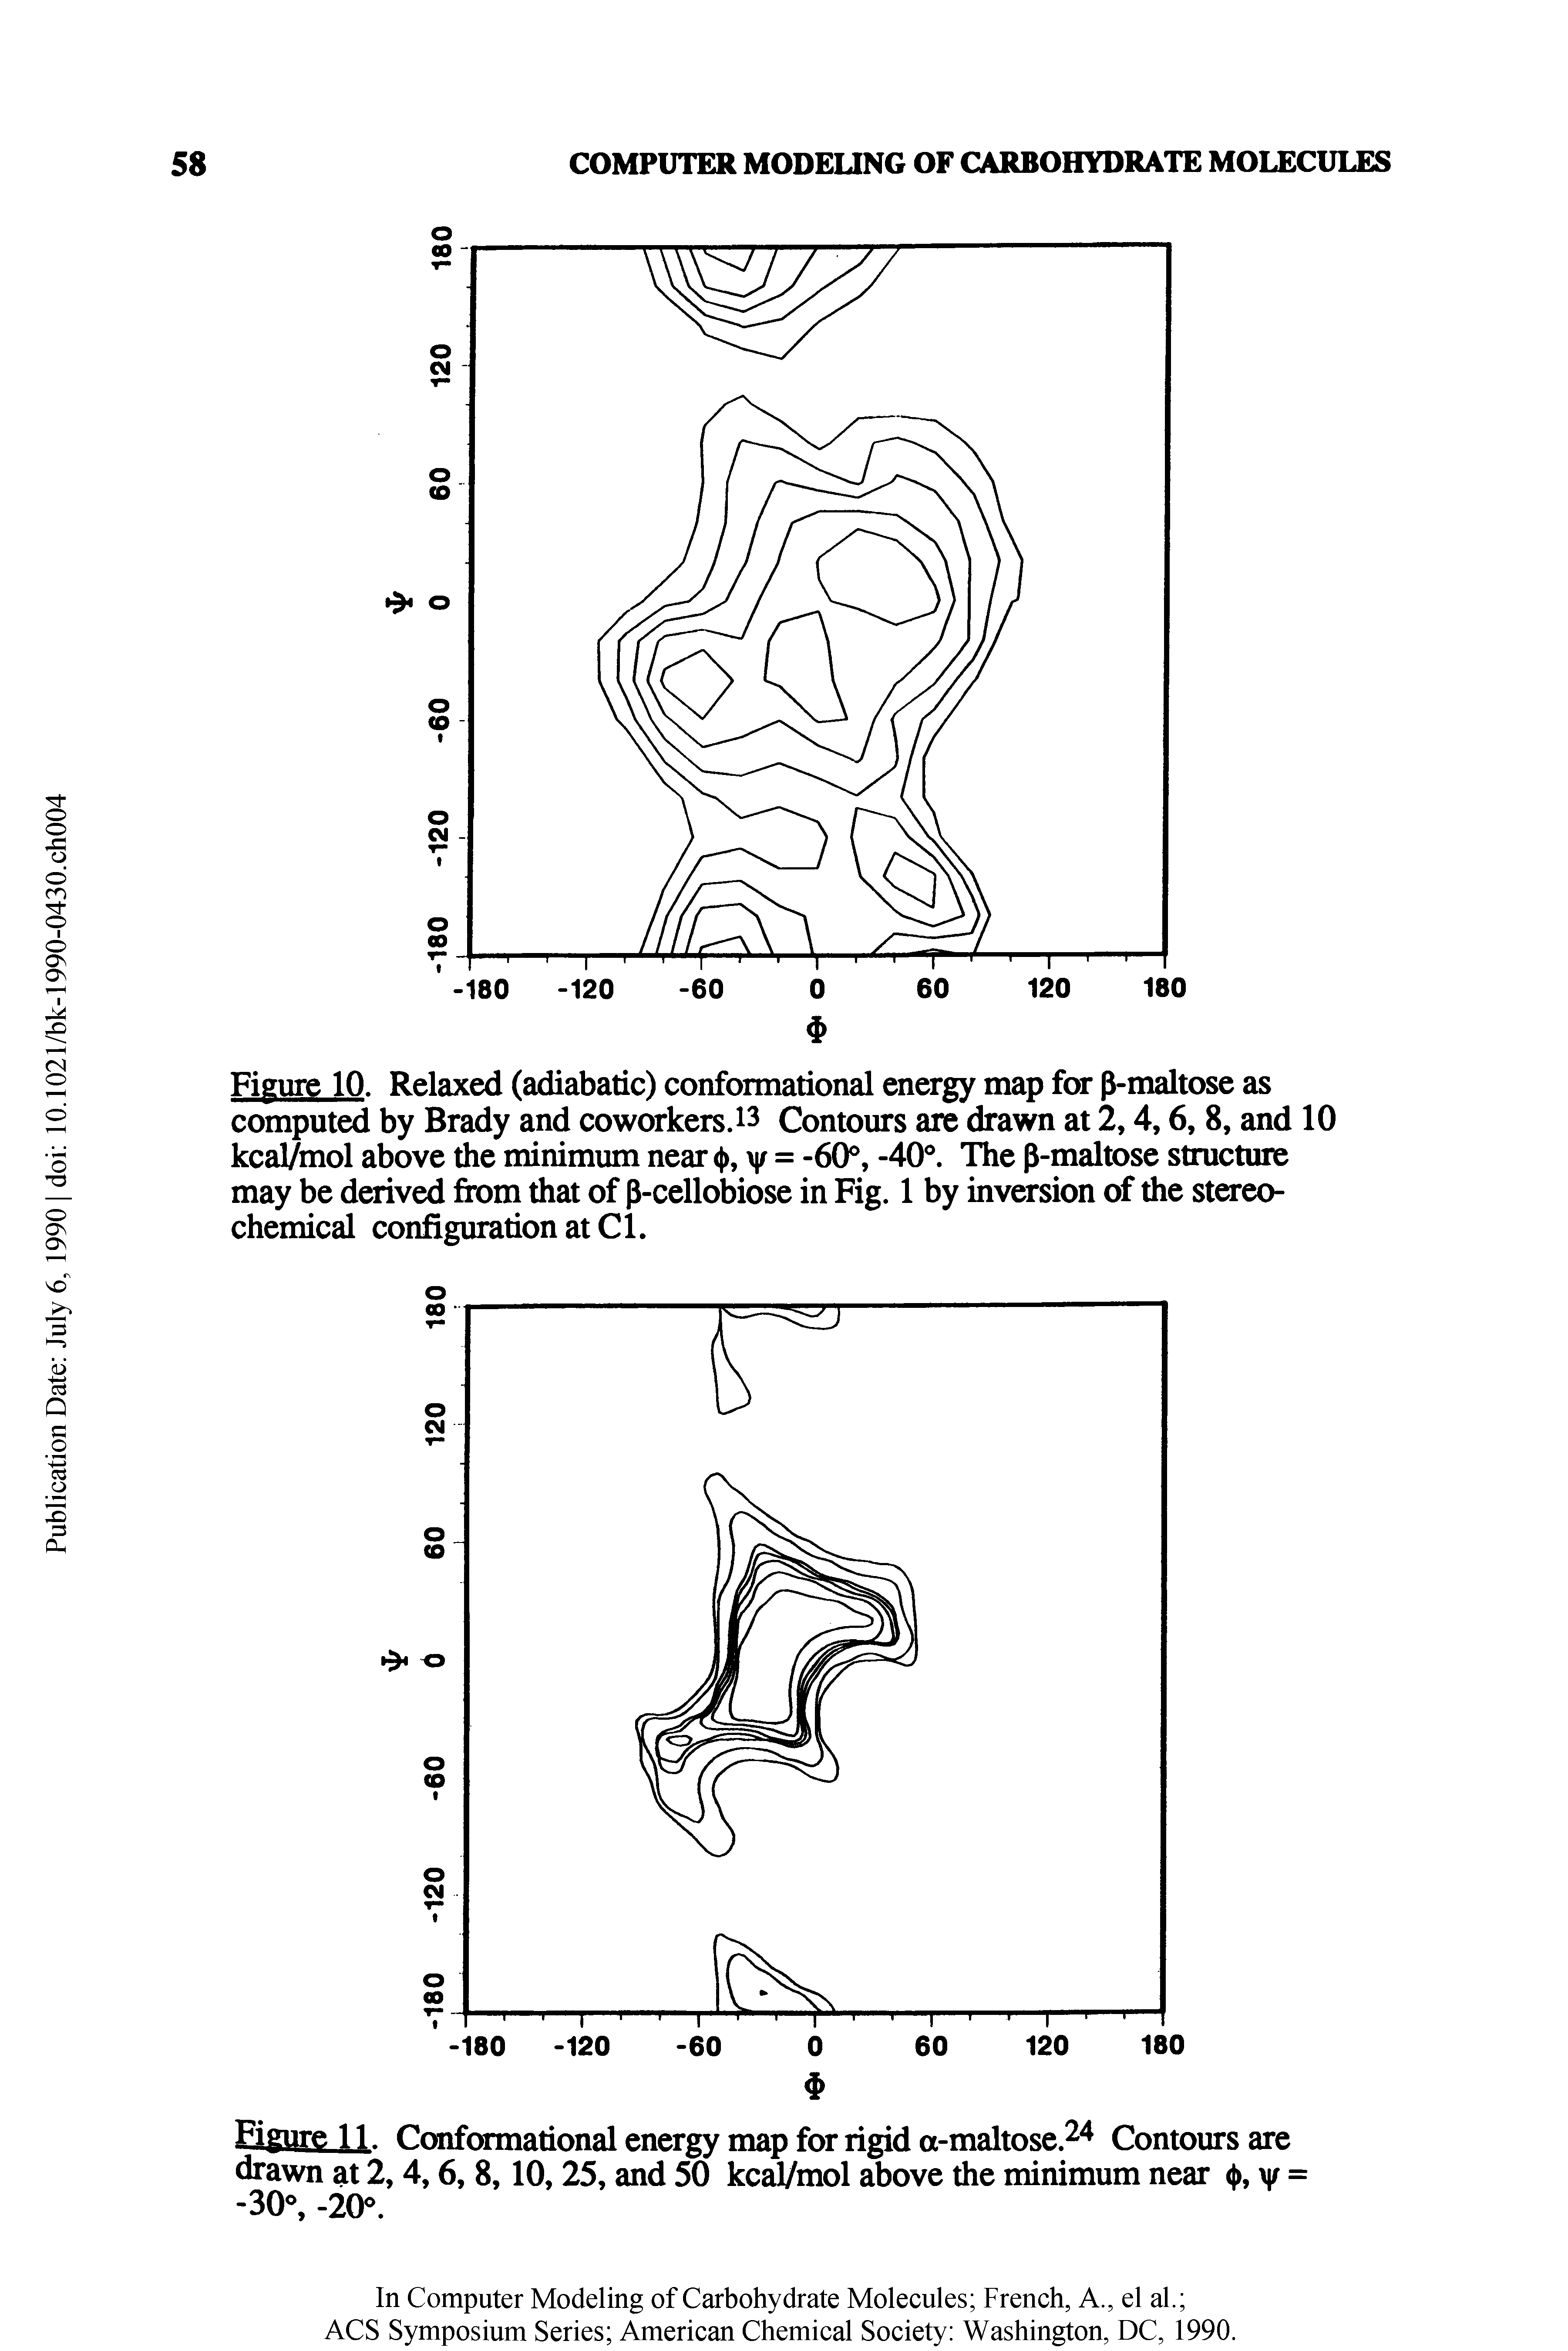 Figure 10. Relaxed (adiabatic) conformational energy map for p-maltose as computed by Brady and coworkers.i3 Contours are drawn at 2,4,6, 8, and 10 kcal/mol above the minimum near < ), y = -60°, -40°. The p-maltose structure may be derived from that of p-cellobiose in Fig. 1 by inversion of the stereochemical configuration at Cl.